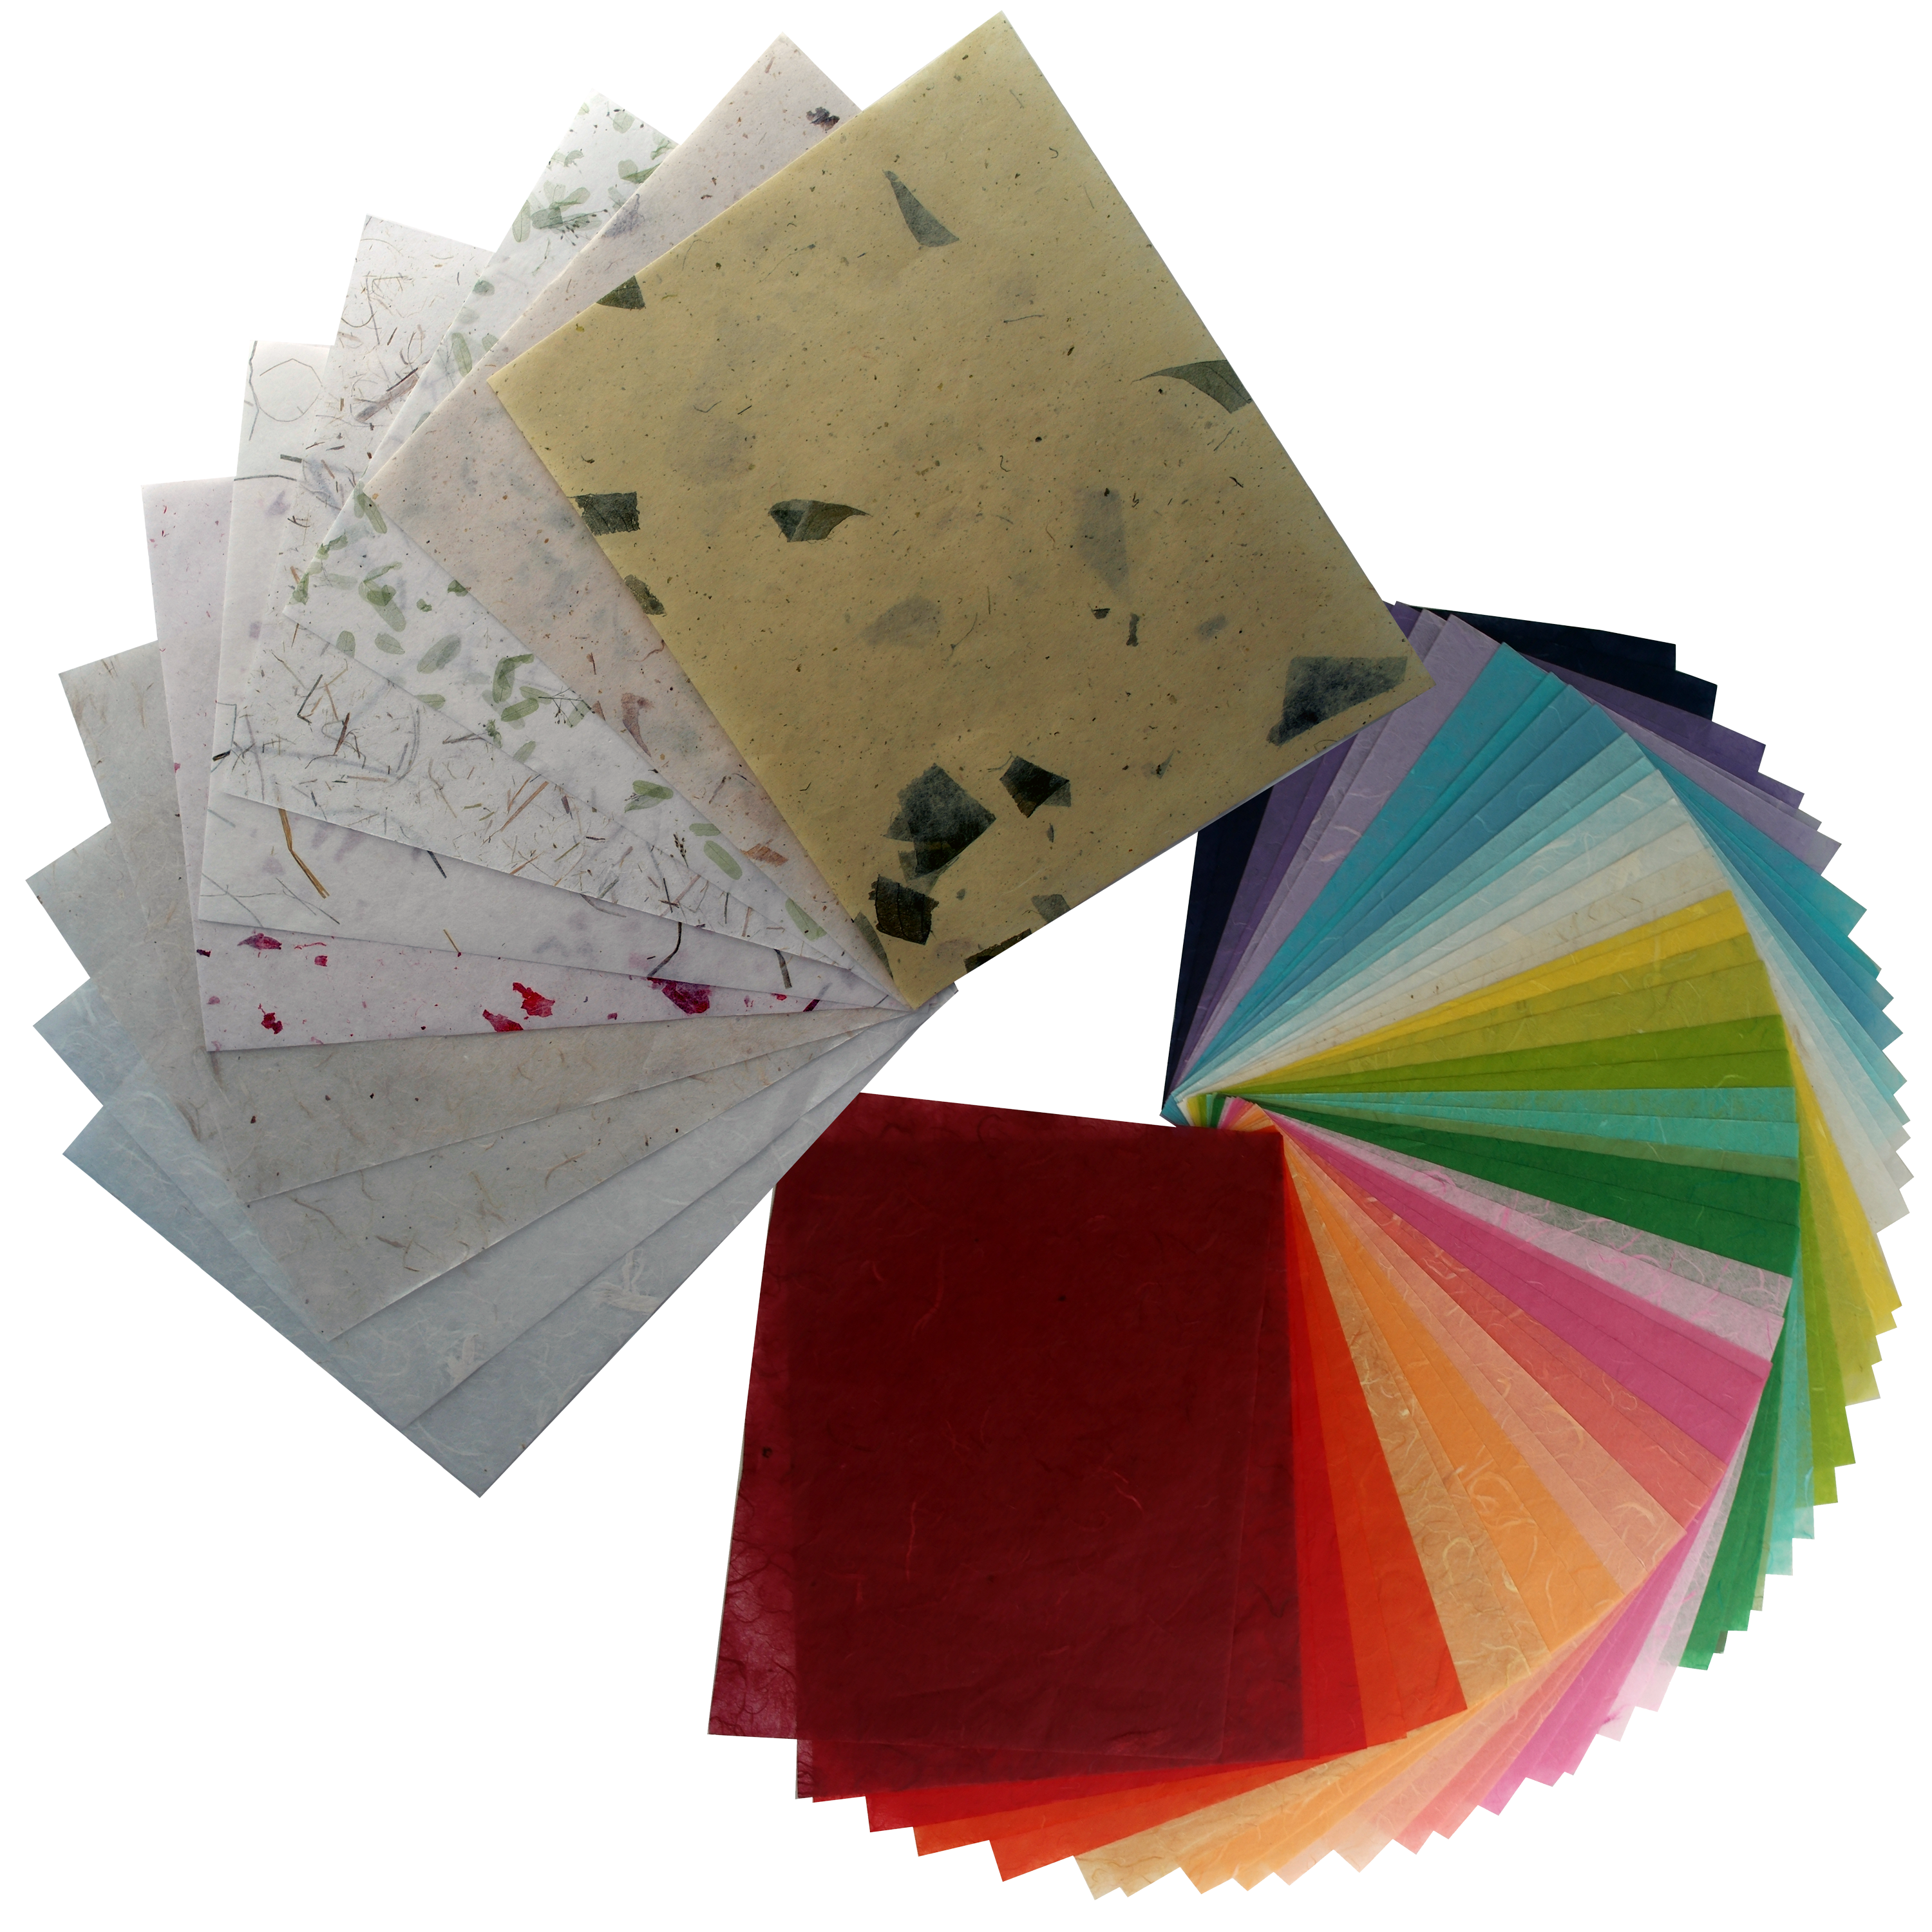 Buy Assorted Color 65 Sheets 8.5x11 Inch Japanese Paper Sheet Design Craft  Hand Made Art Tissue Japan Origami Washi Wholesale Bulk Unryu Suppliers  Thailand Product Card Making Japanese Washi Collage Rice Online